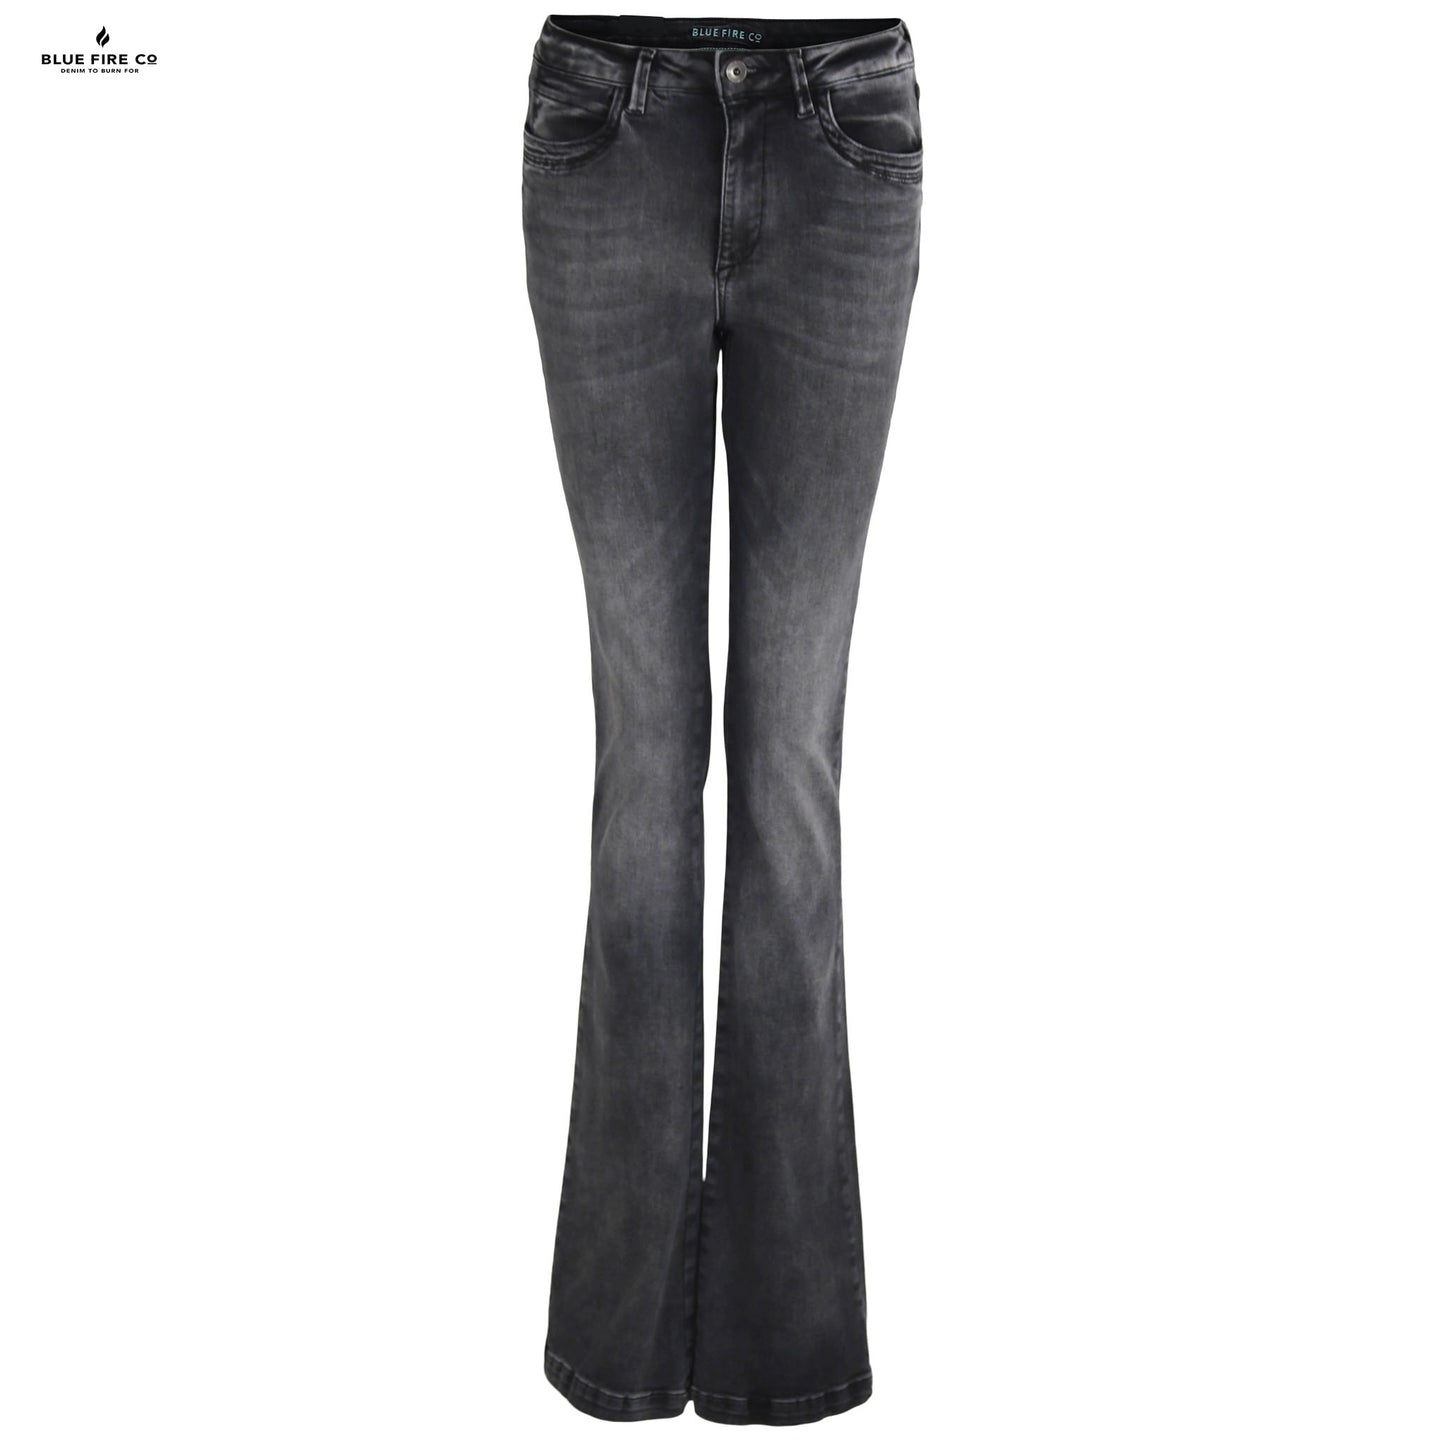 clothing tall women bluefire jeans vicky gray